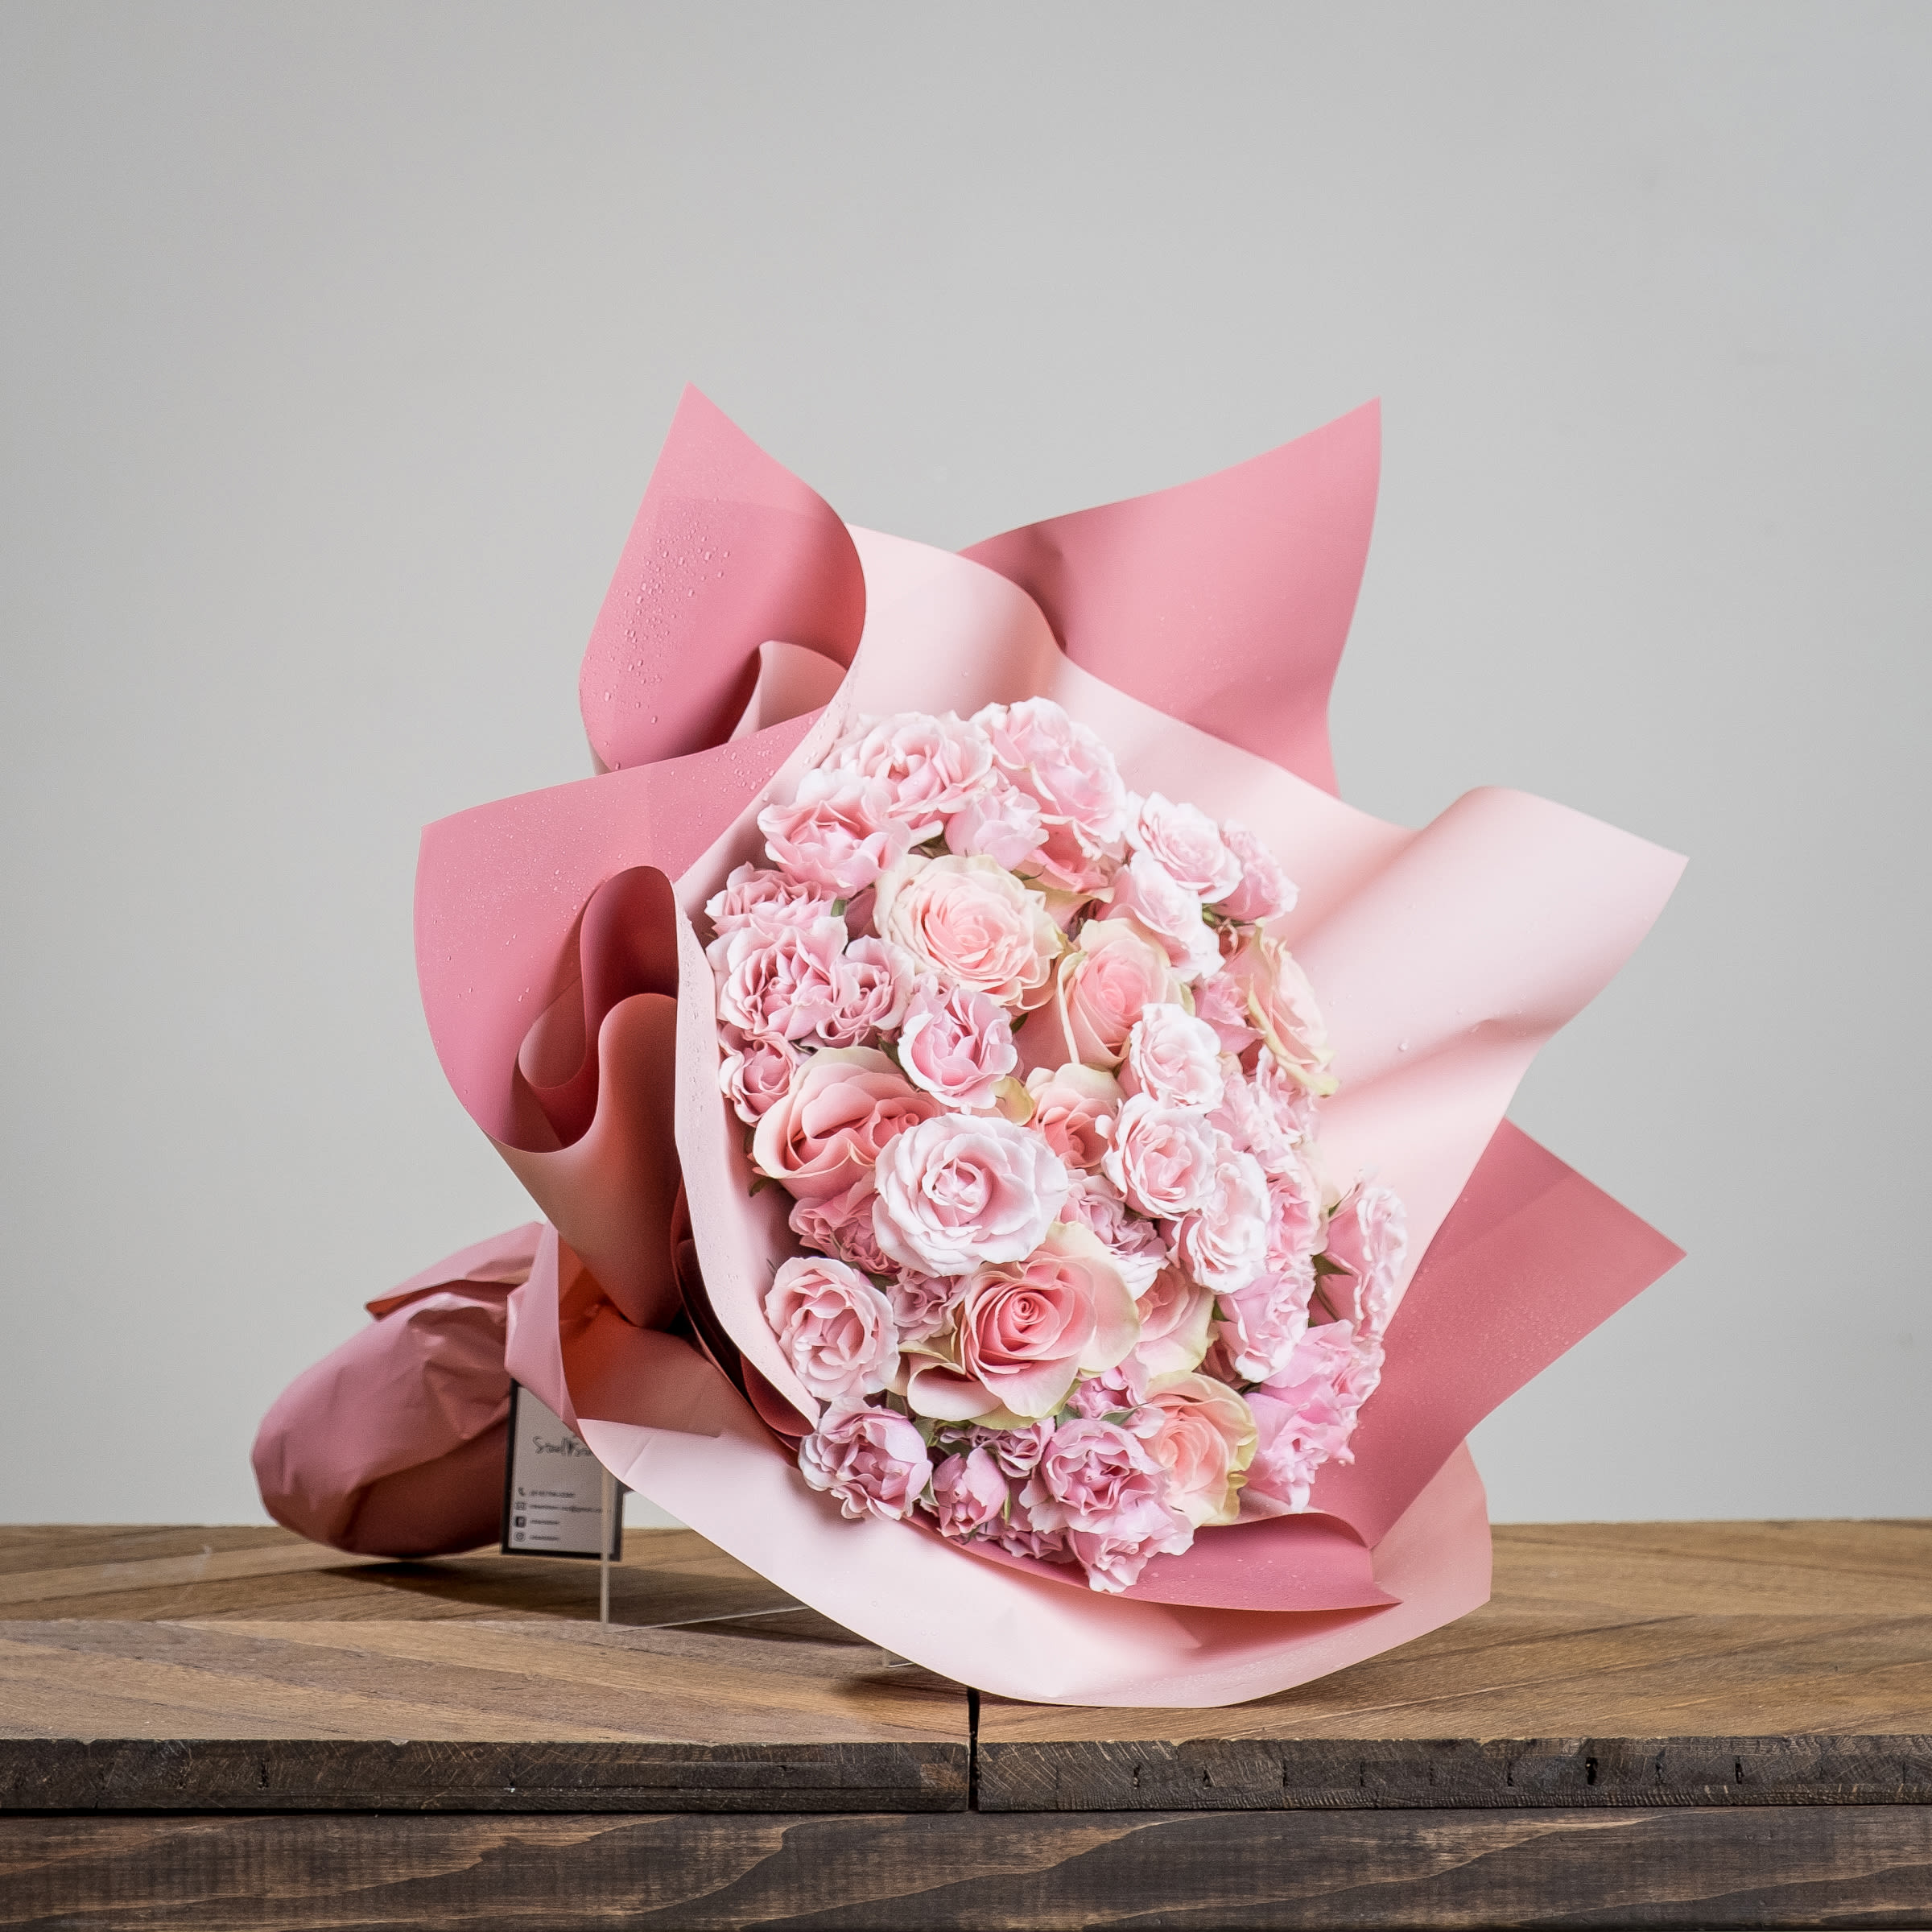 Wrapped Bouquet